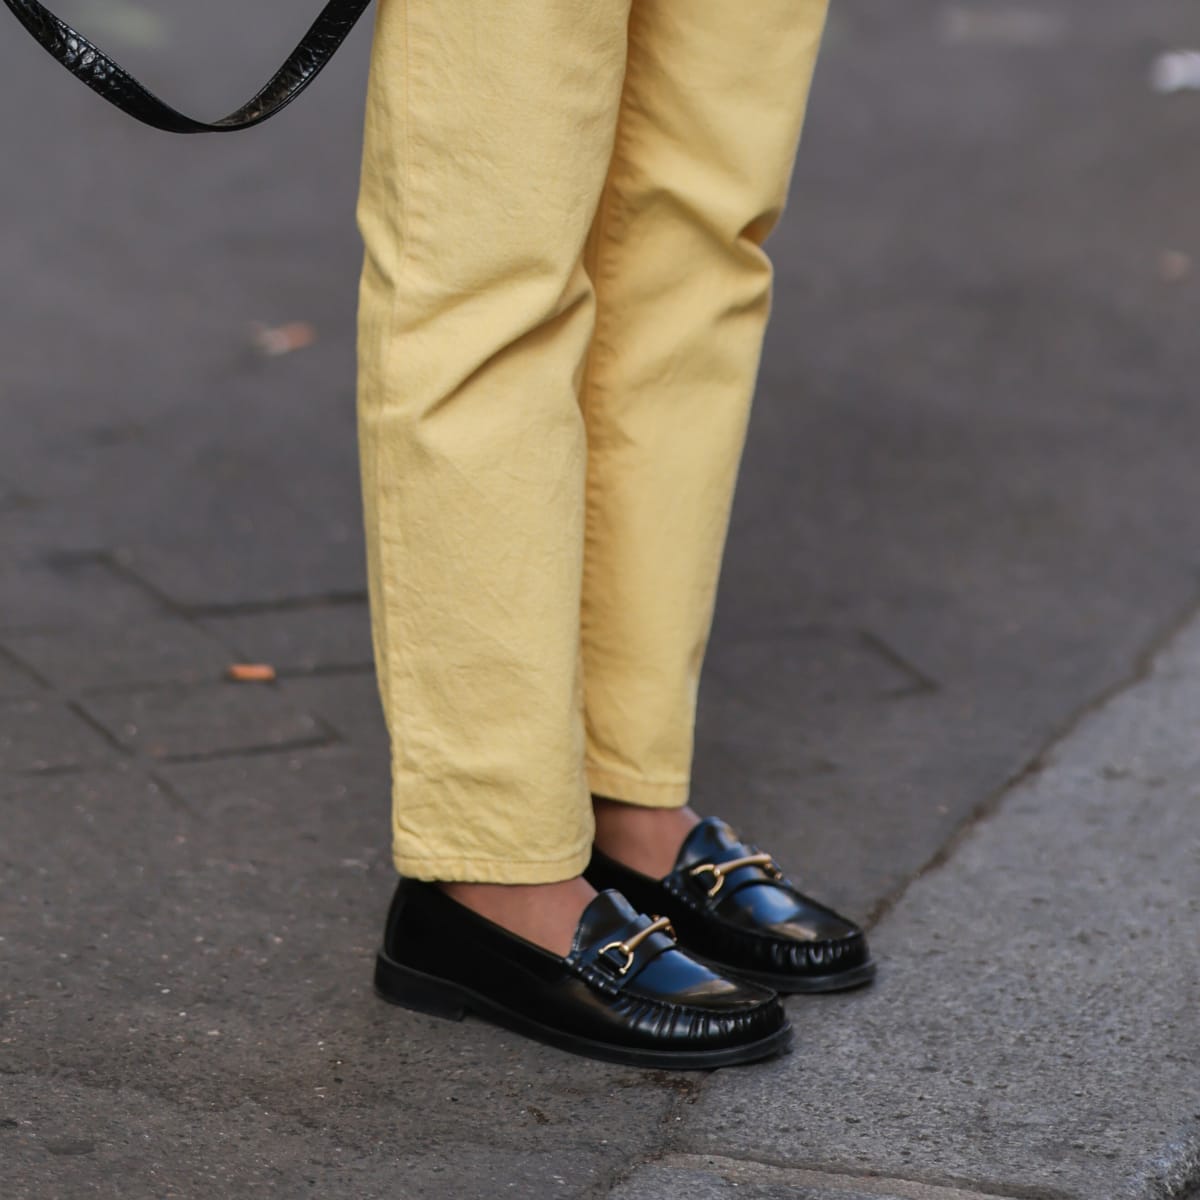 Loafers Are the Versatile MVPs of Footwear - Fashionista